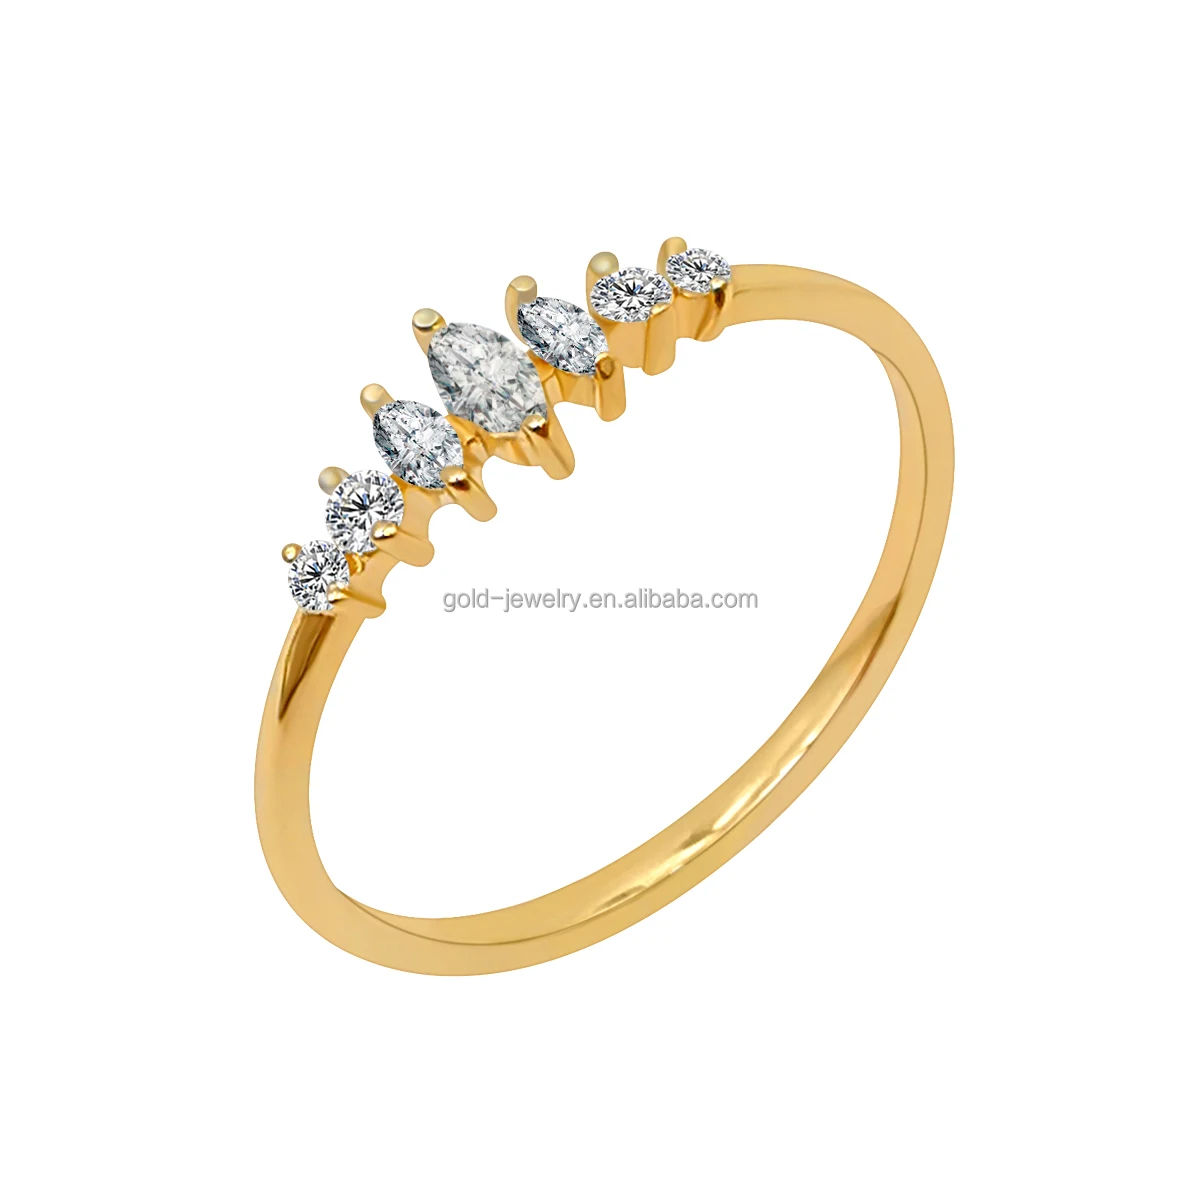 

Luxury Wedding Gold Rings AU585 14K Solid Yellow Gold Moissanite Ring Fine Jewelry Available In Yellow Rose White